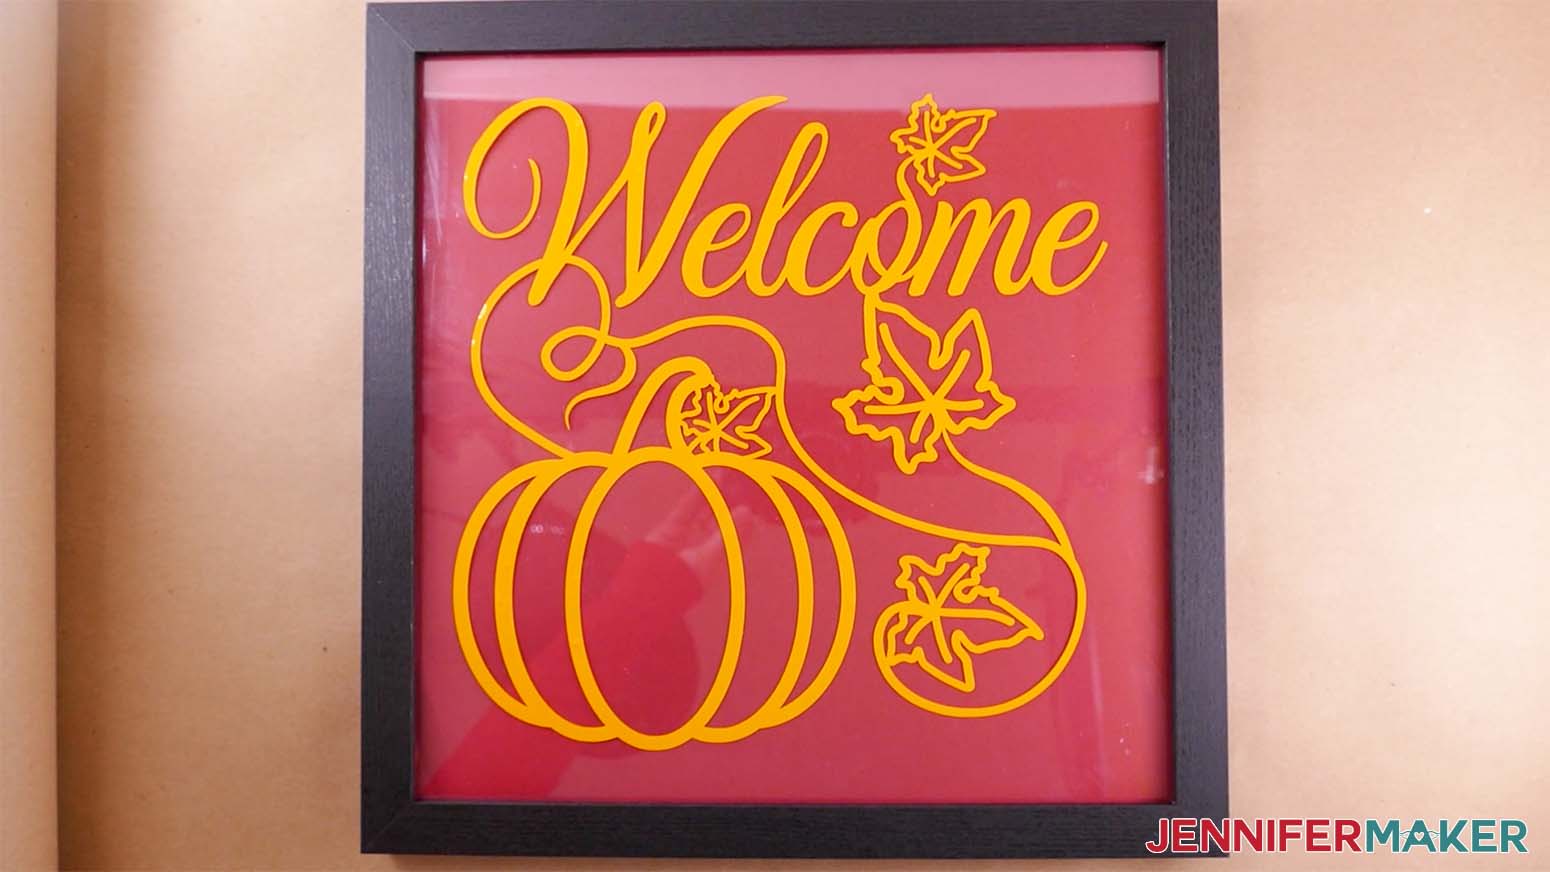 Image showing the completed adhesive vinyl welcome sign.